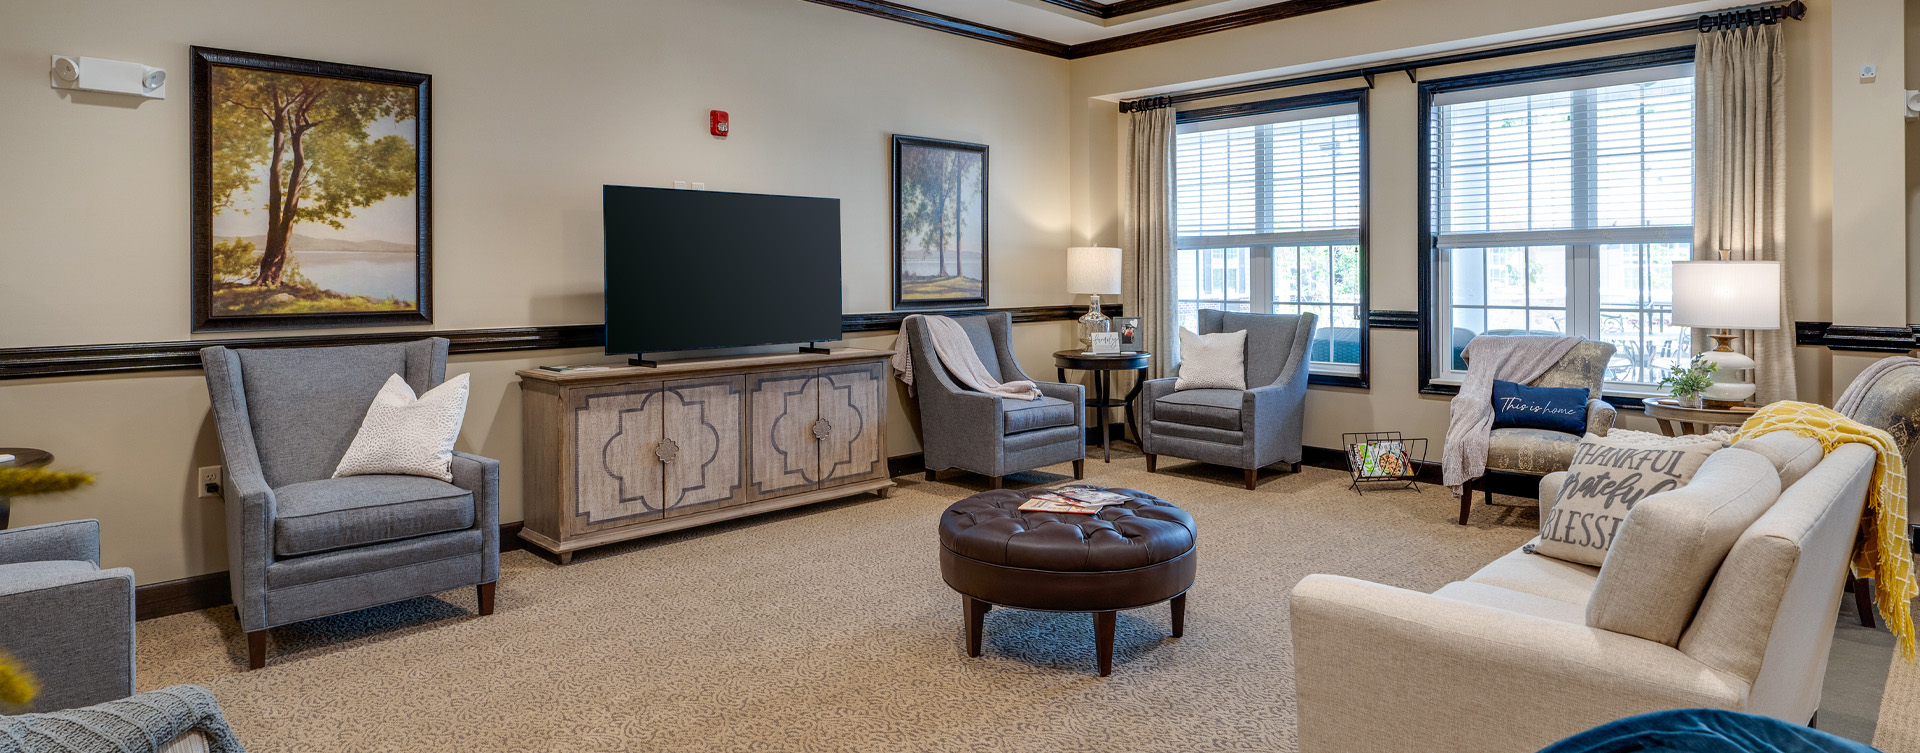 Socialize with friends in the living room at Bickford of Chesapeake